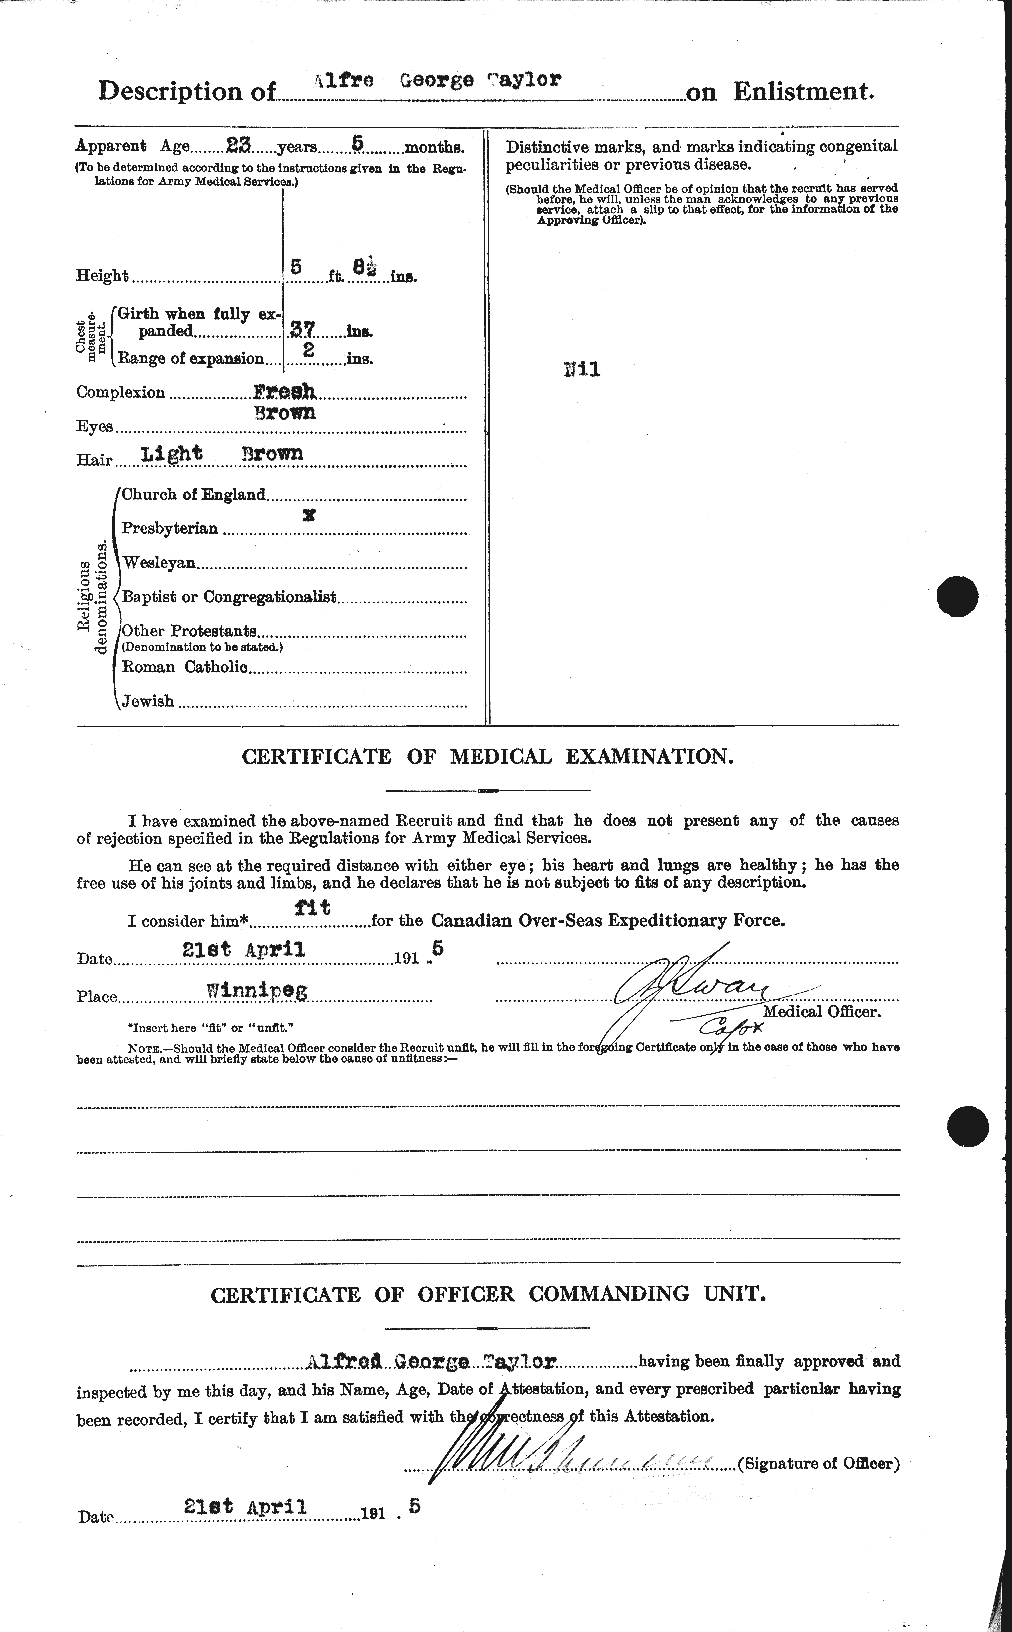 Personnel Records of the First World War - CEF 626187b